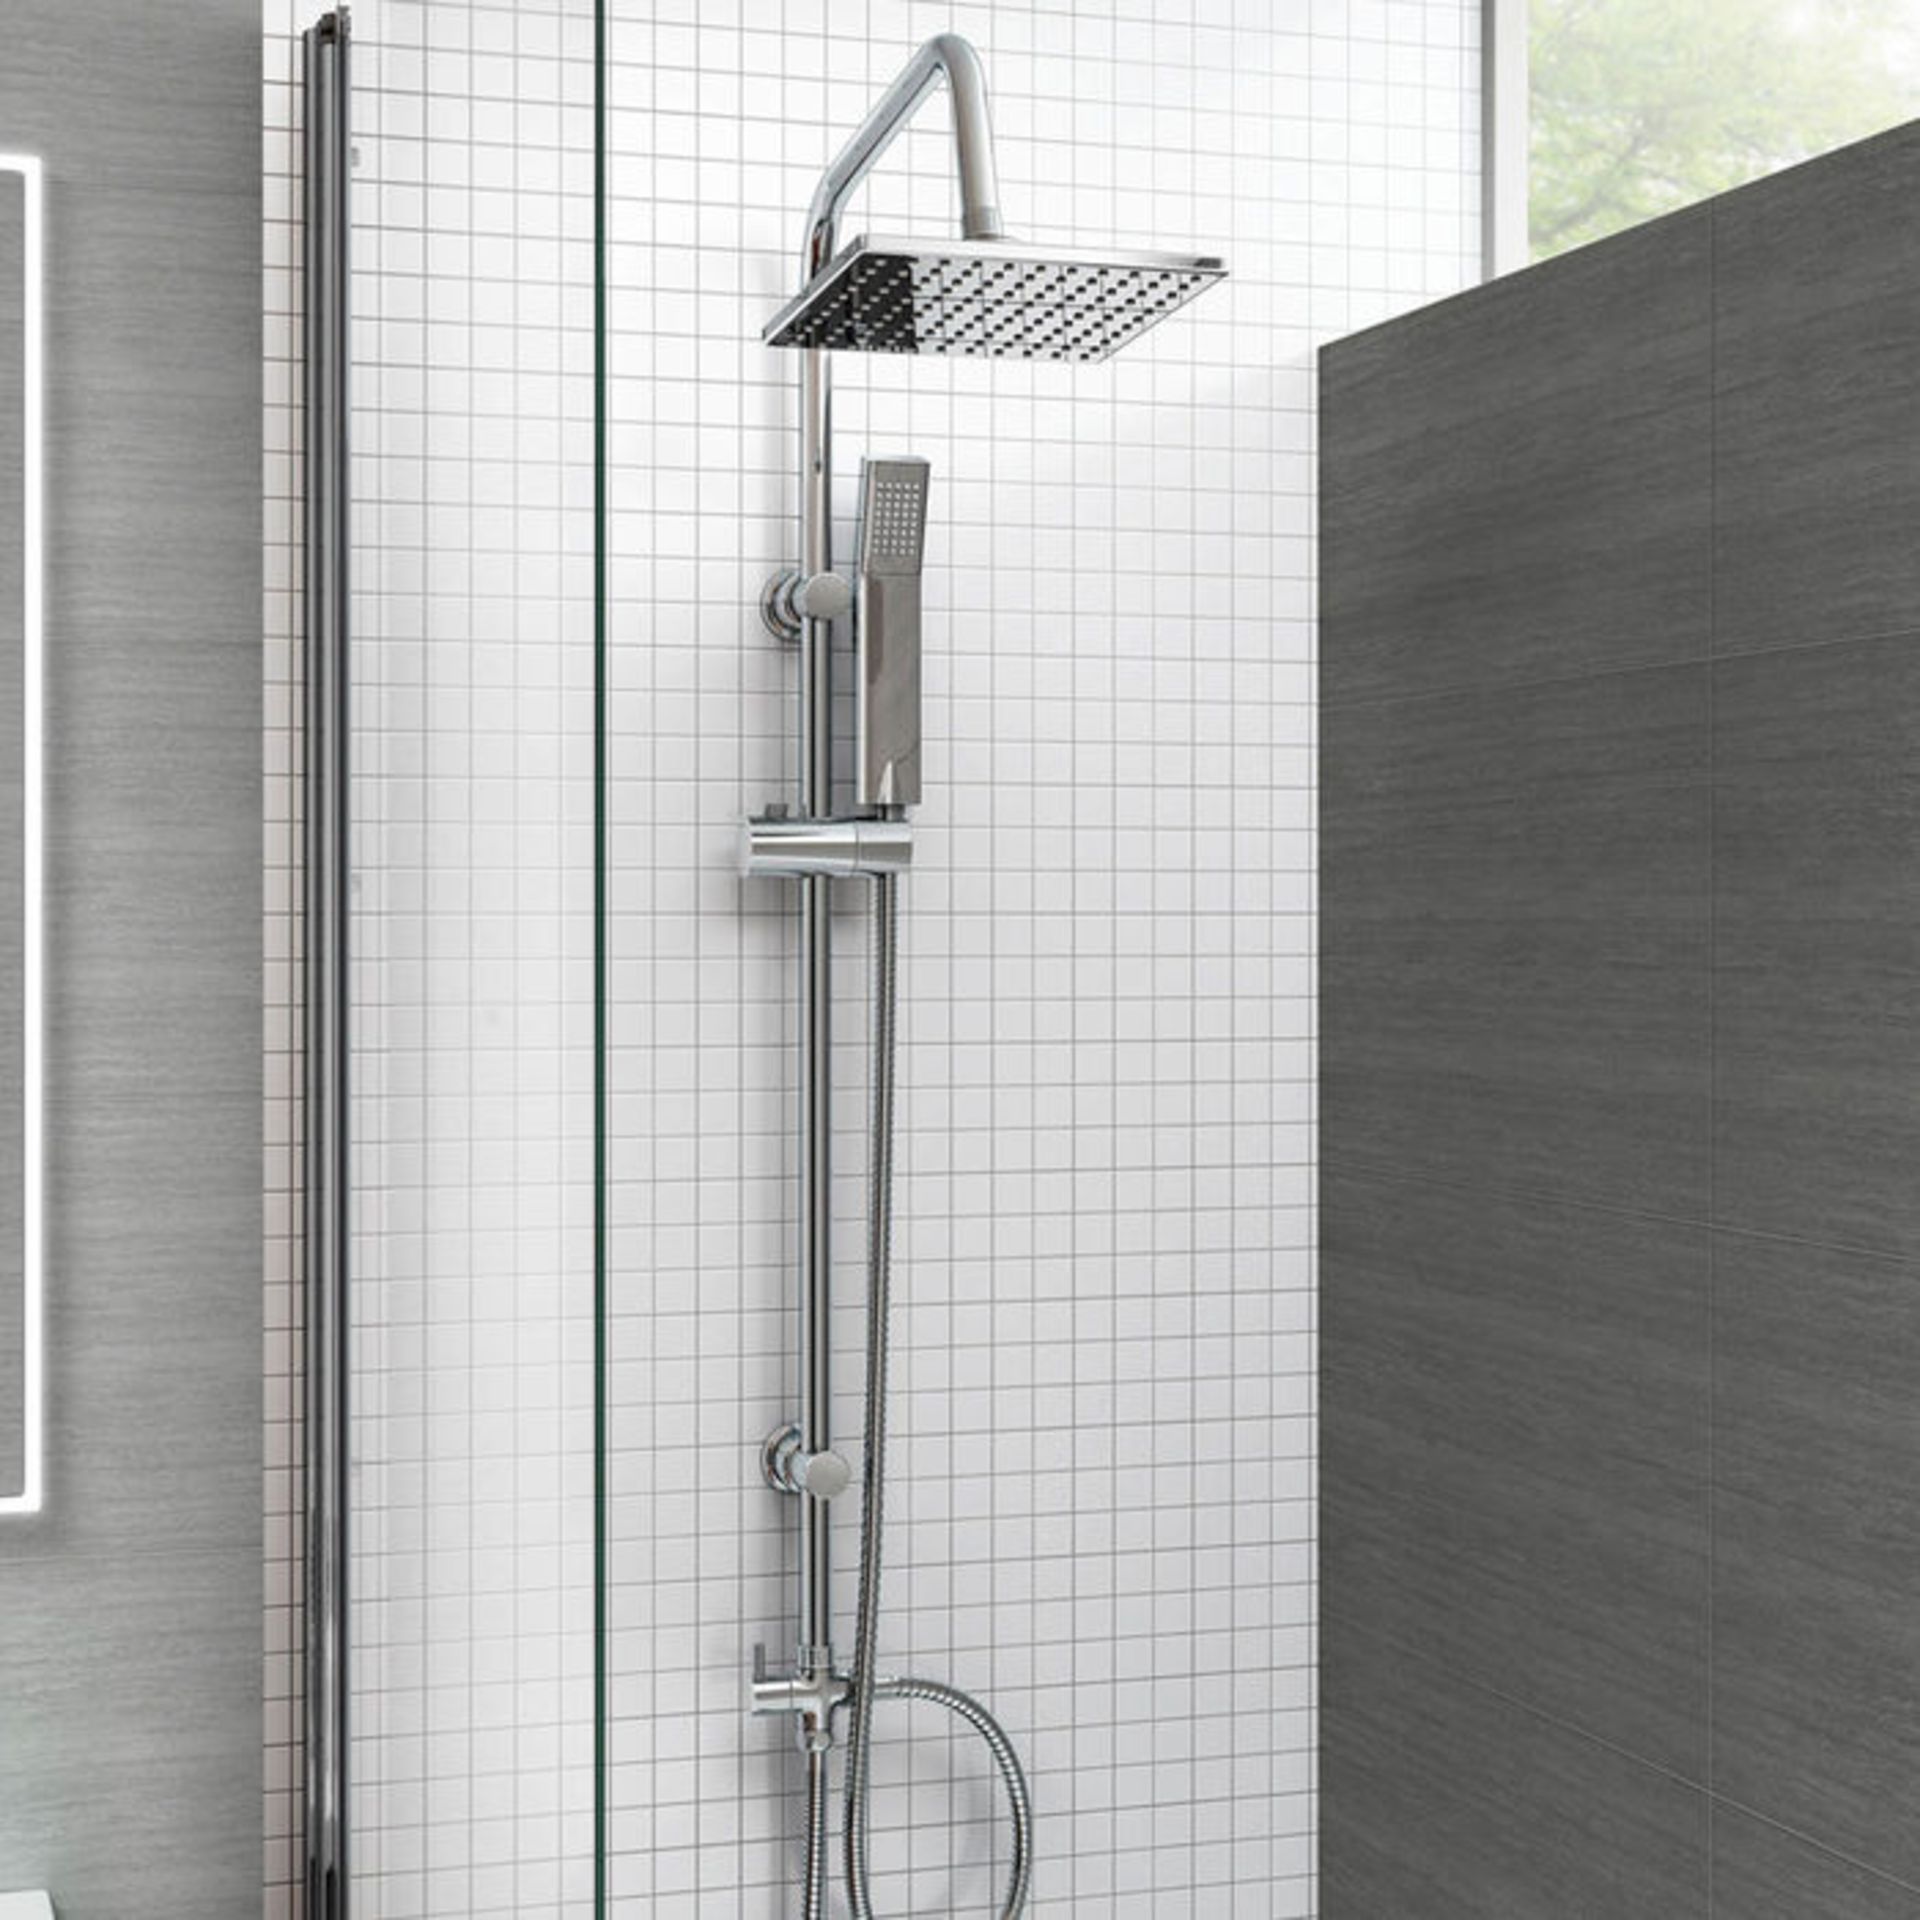 (AH100) 200mm Square Head, Riser Rail Handheld Kit. Quality stainless steel shower head with Easy